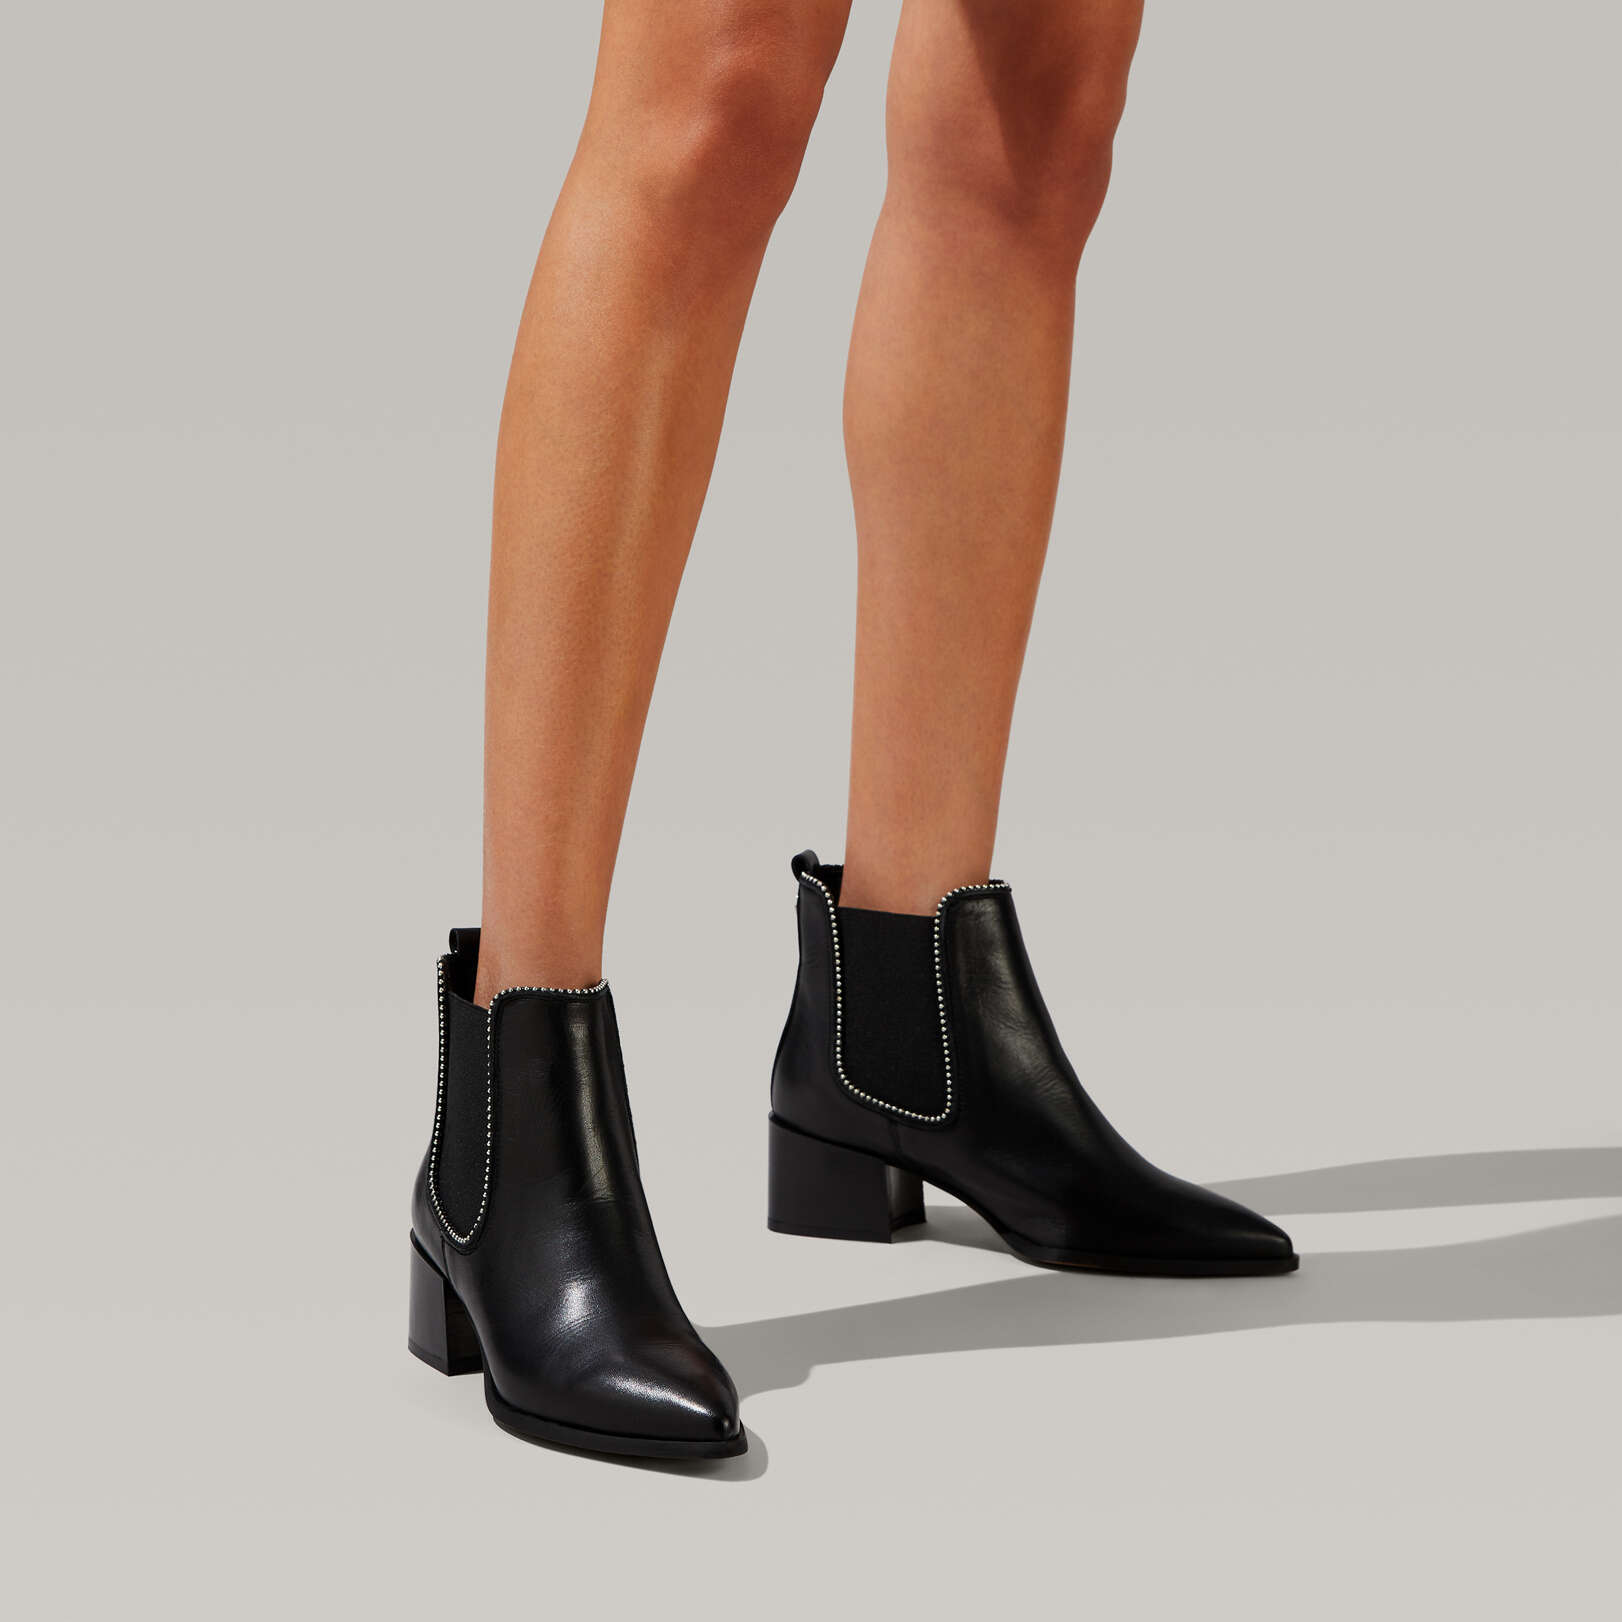 SPIRE - CARVELA Ankle Boots